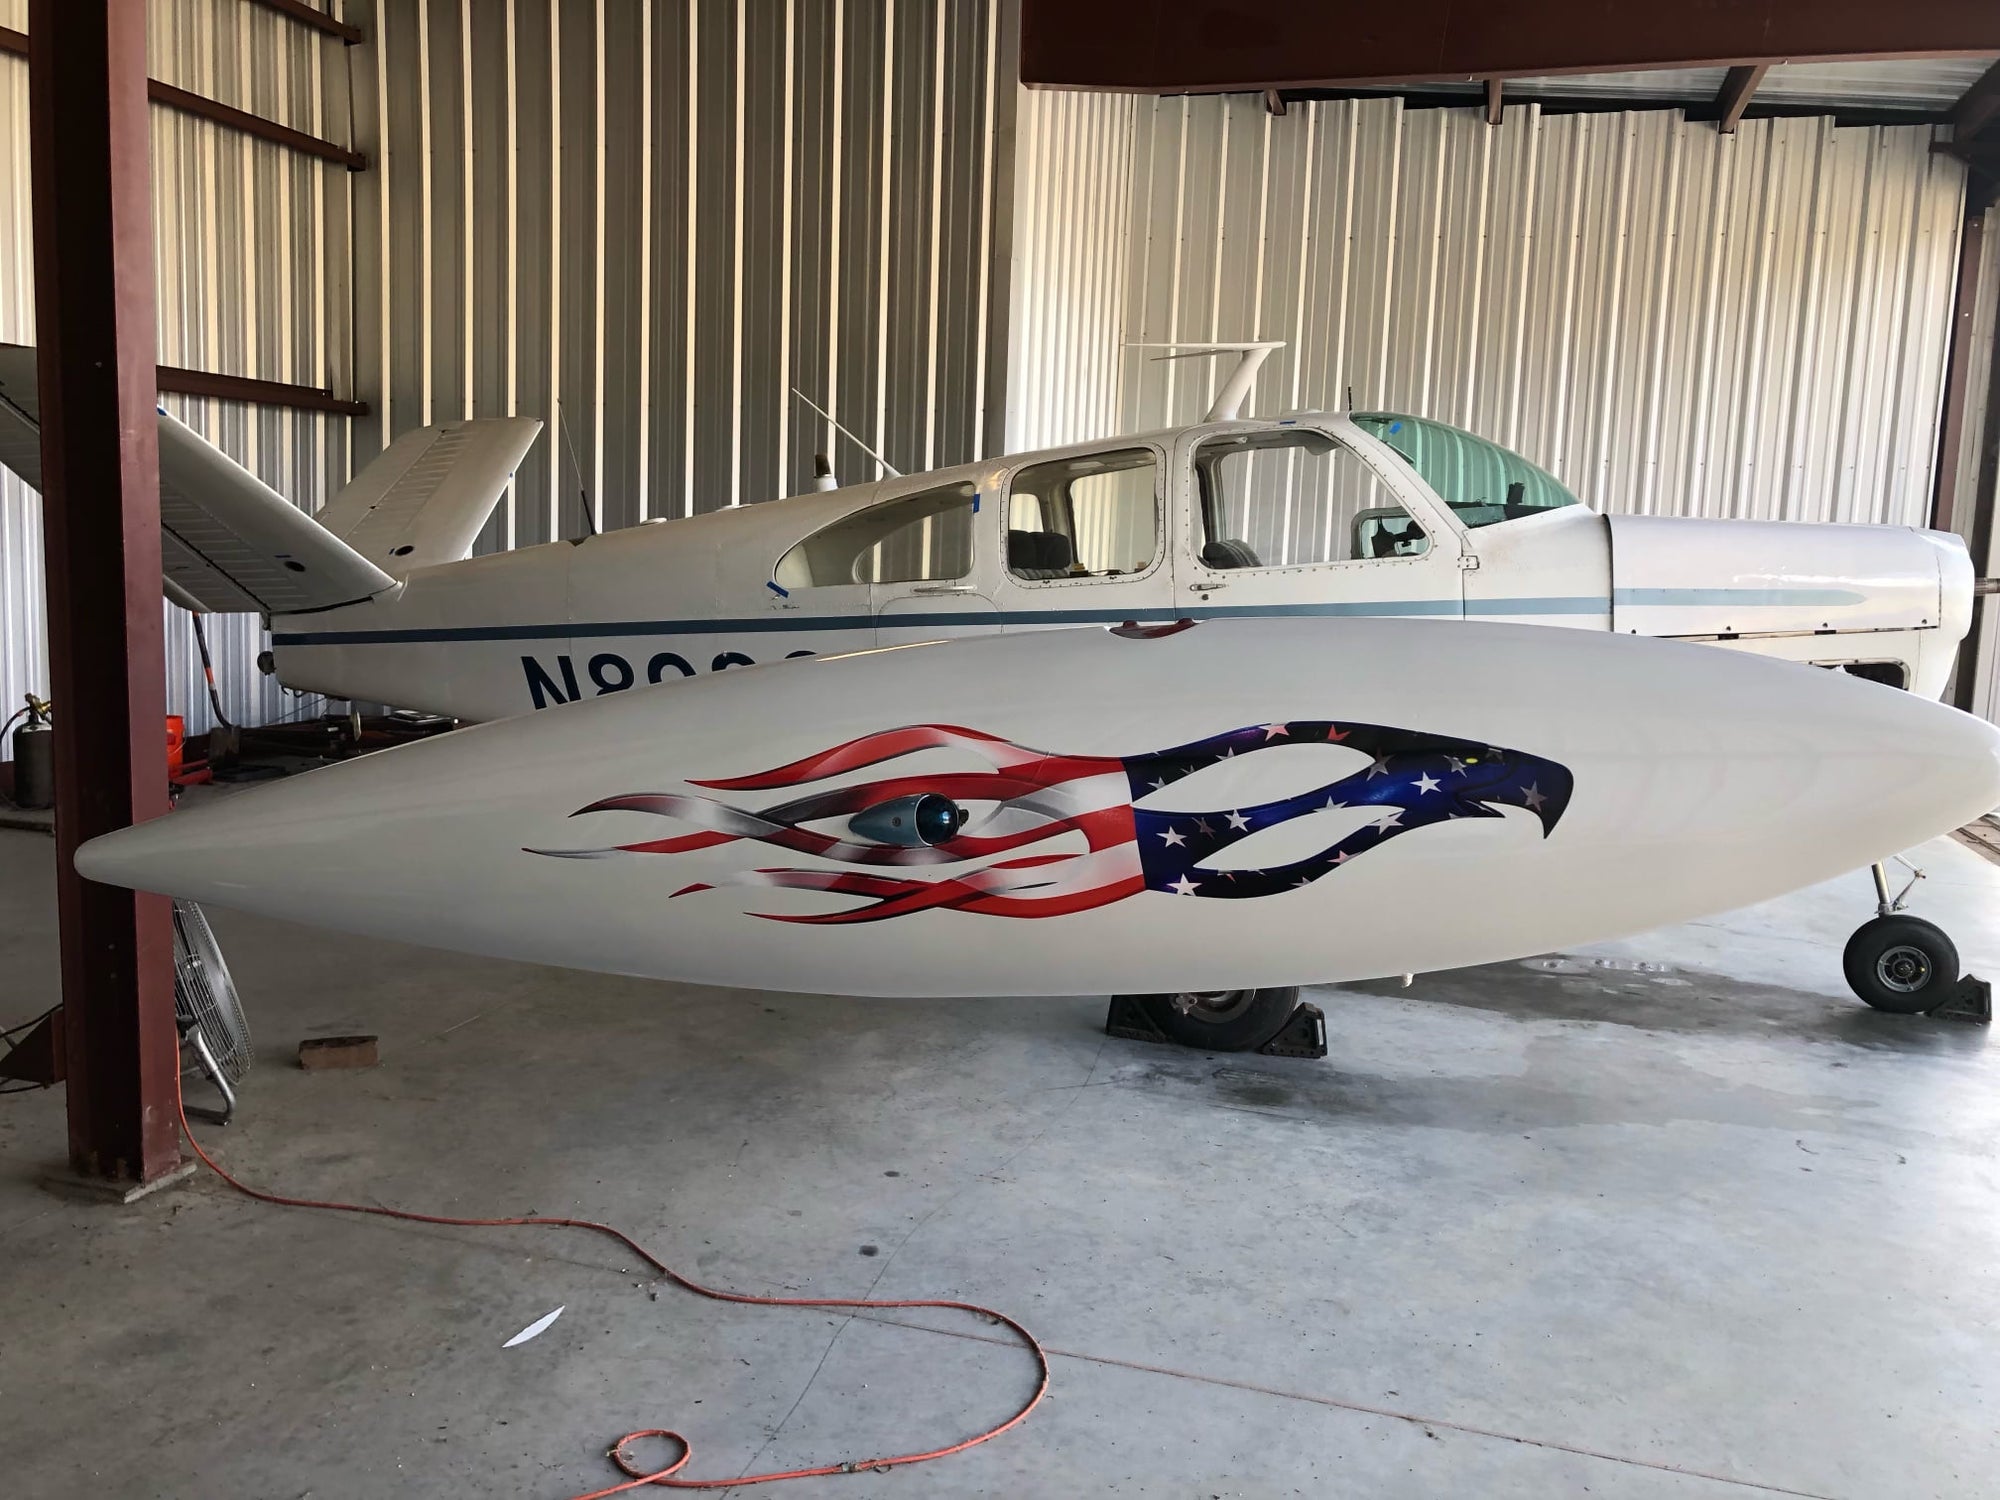 american flag eagle decals on side of a white plane